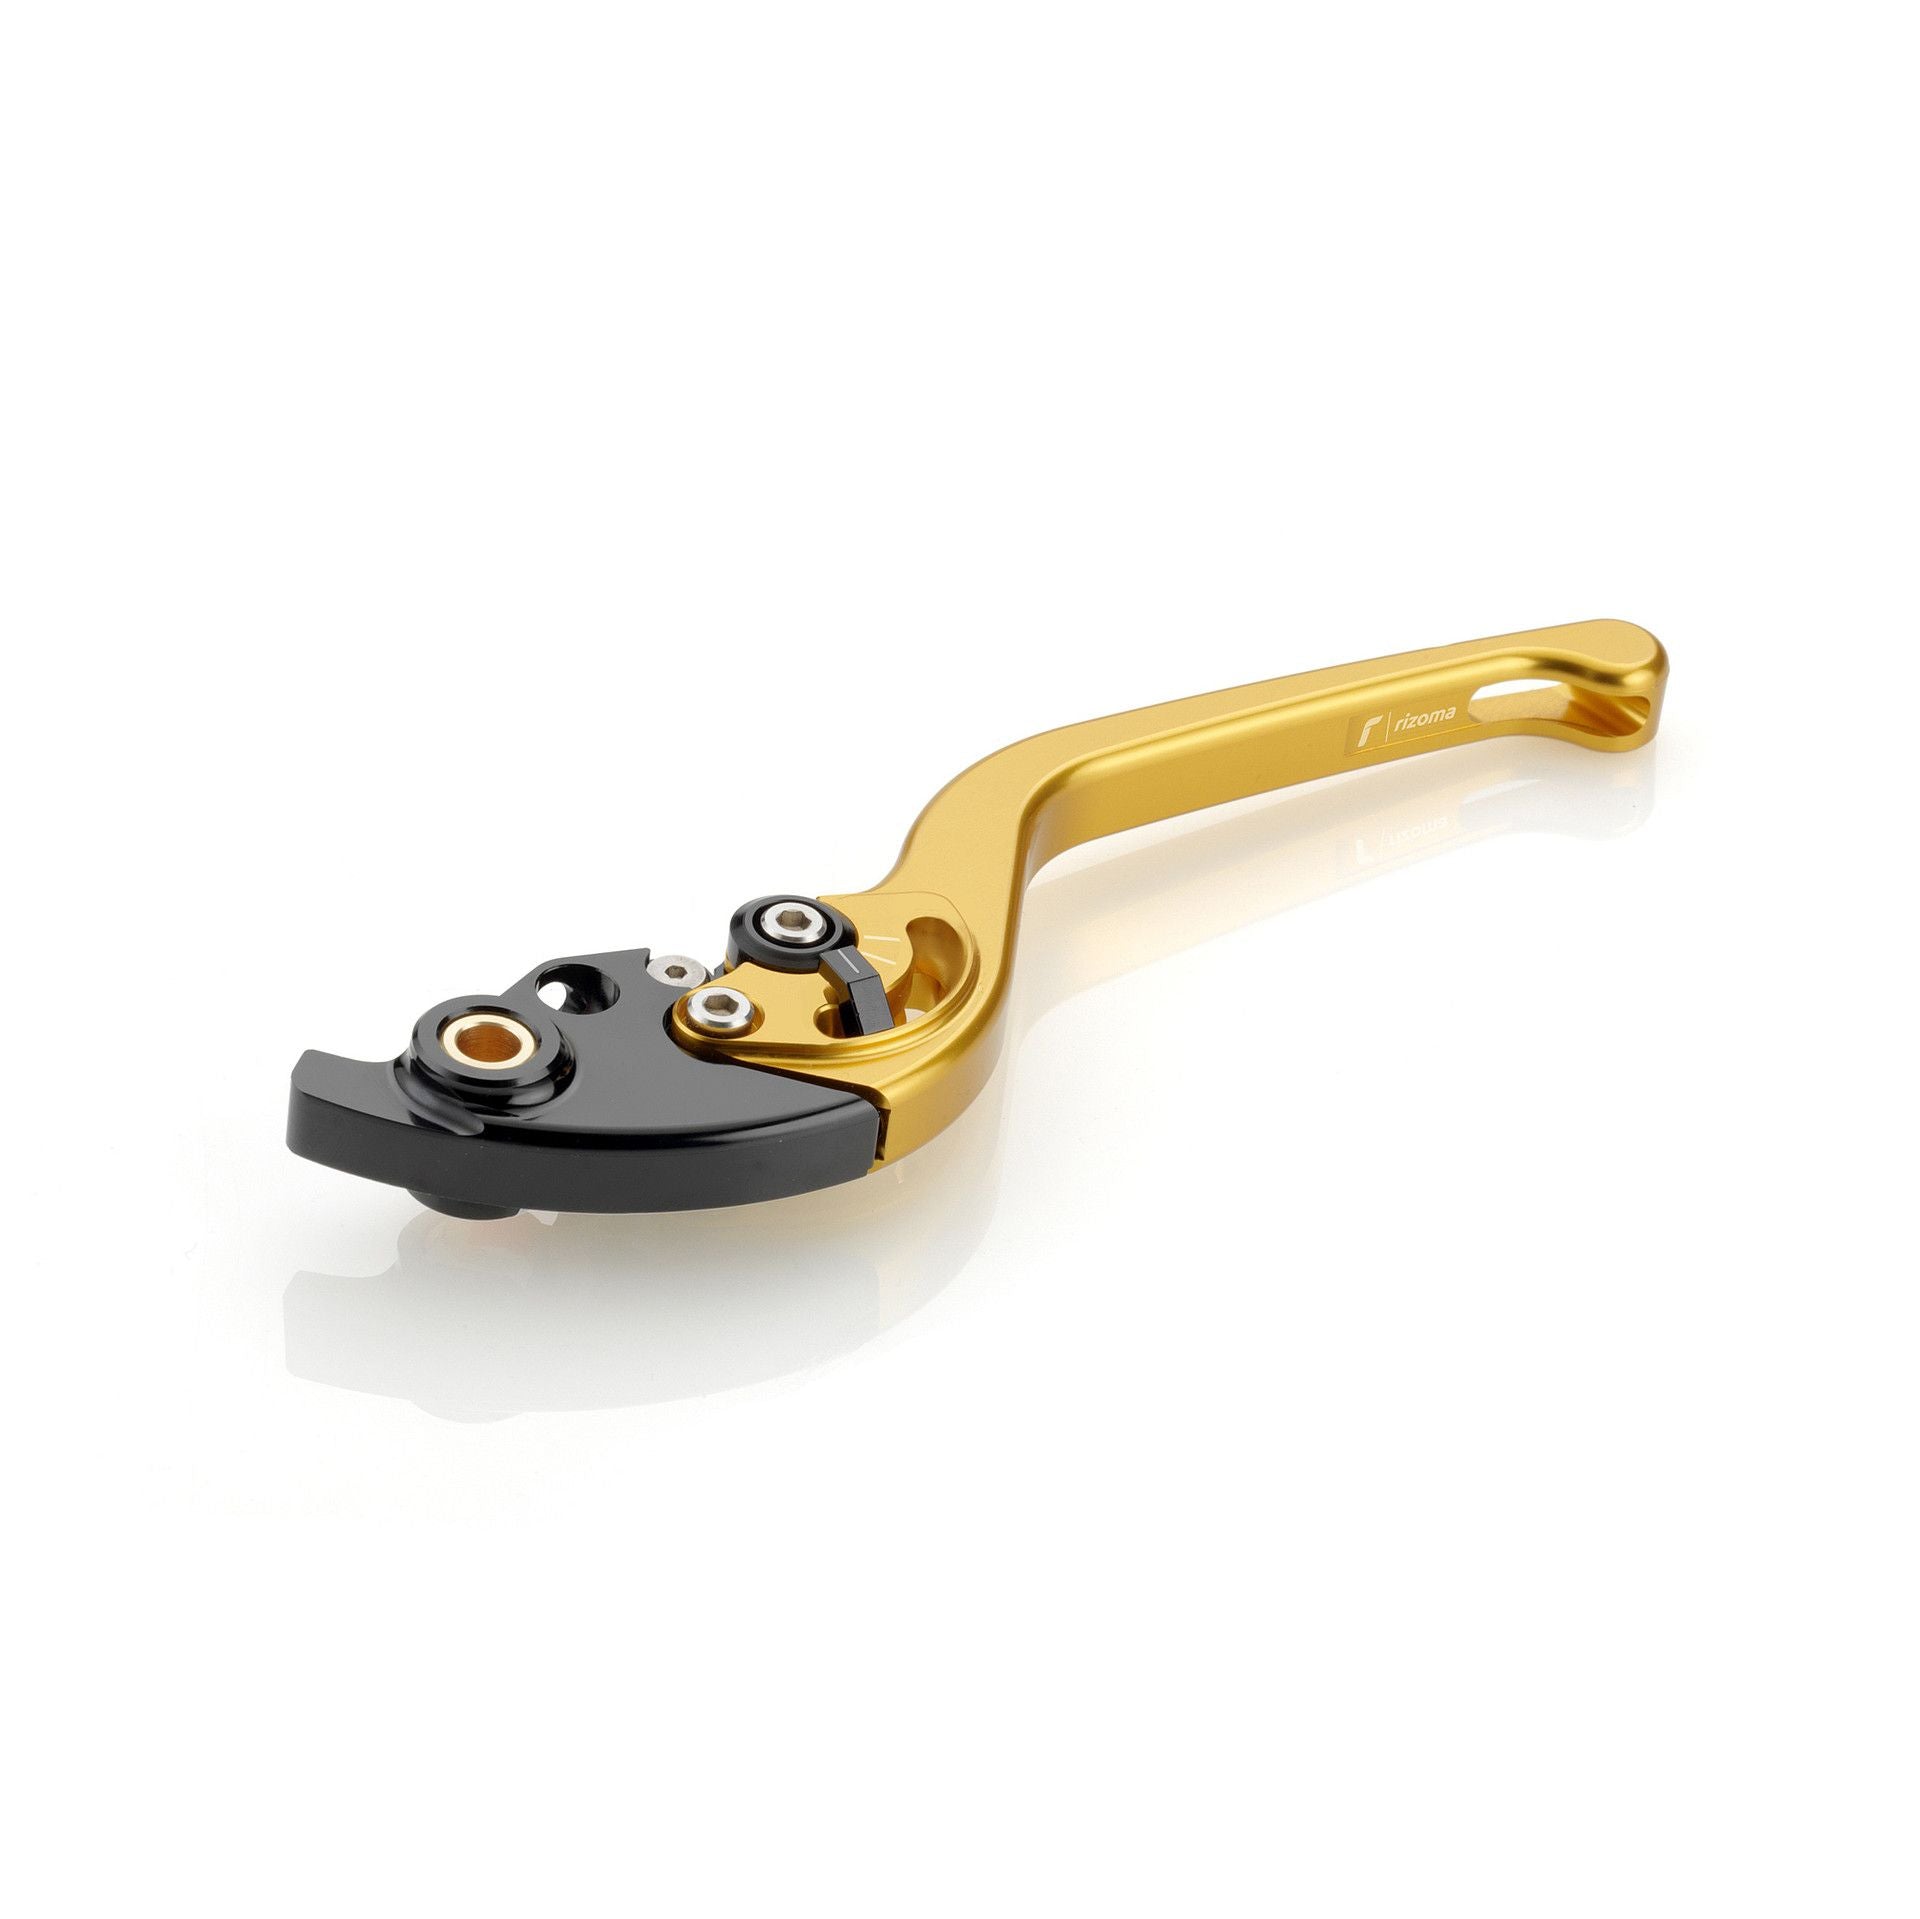 Rizoma RRC Clutch Lever LCR706G - Fire Gold